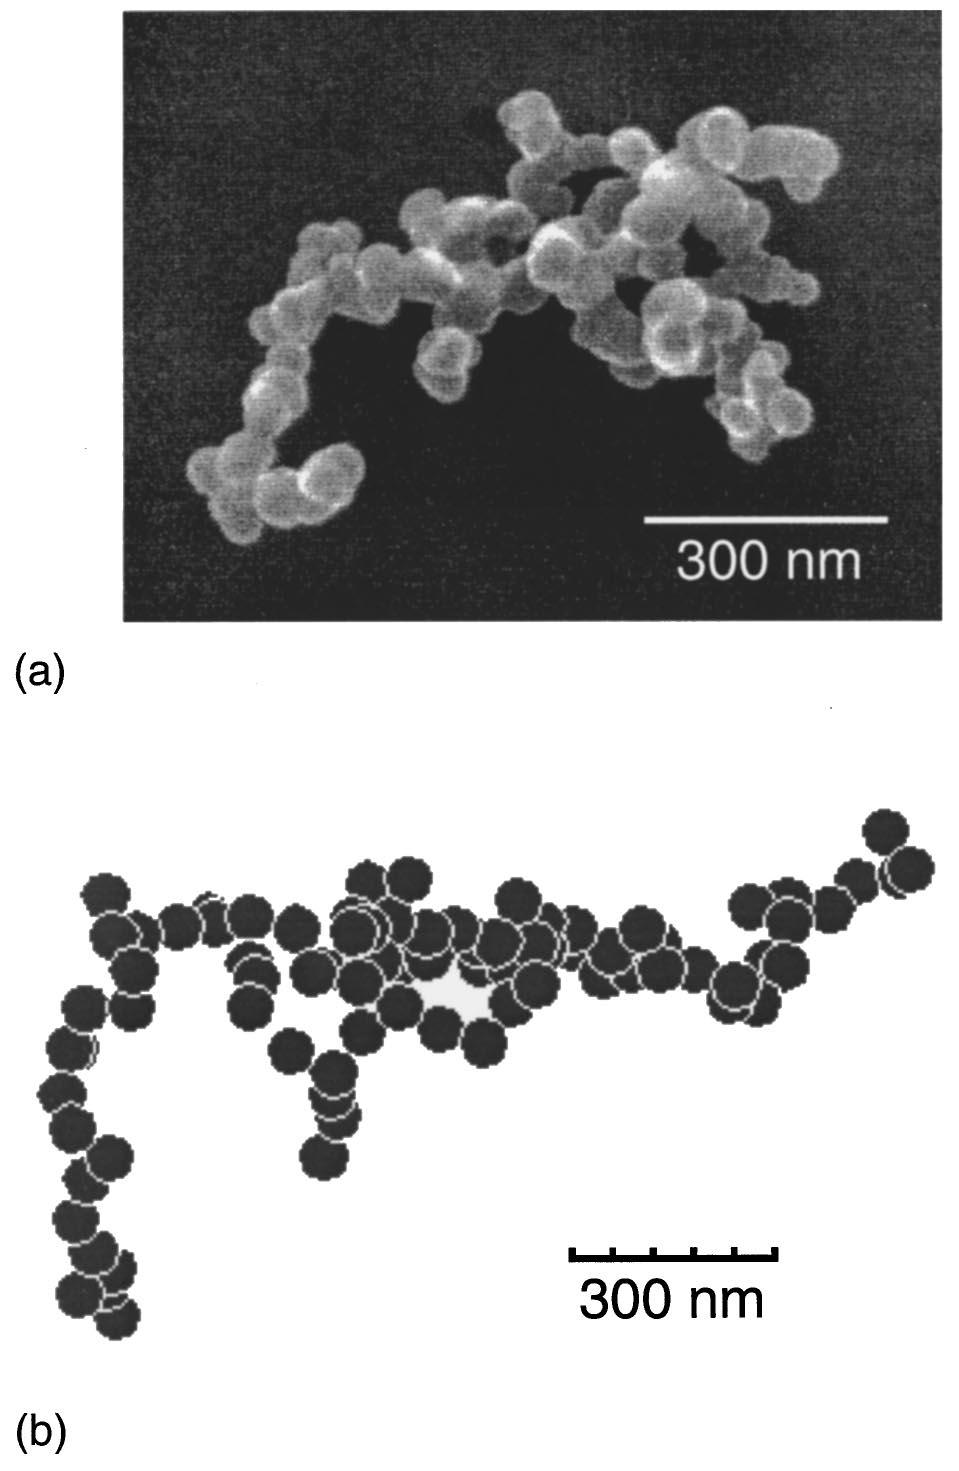 FIG. 4. Simulated agglomerates generated using 1 m radius particles over a range of approach velocities. a 50, b 75, c 100, and d 300 cm/s.